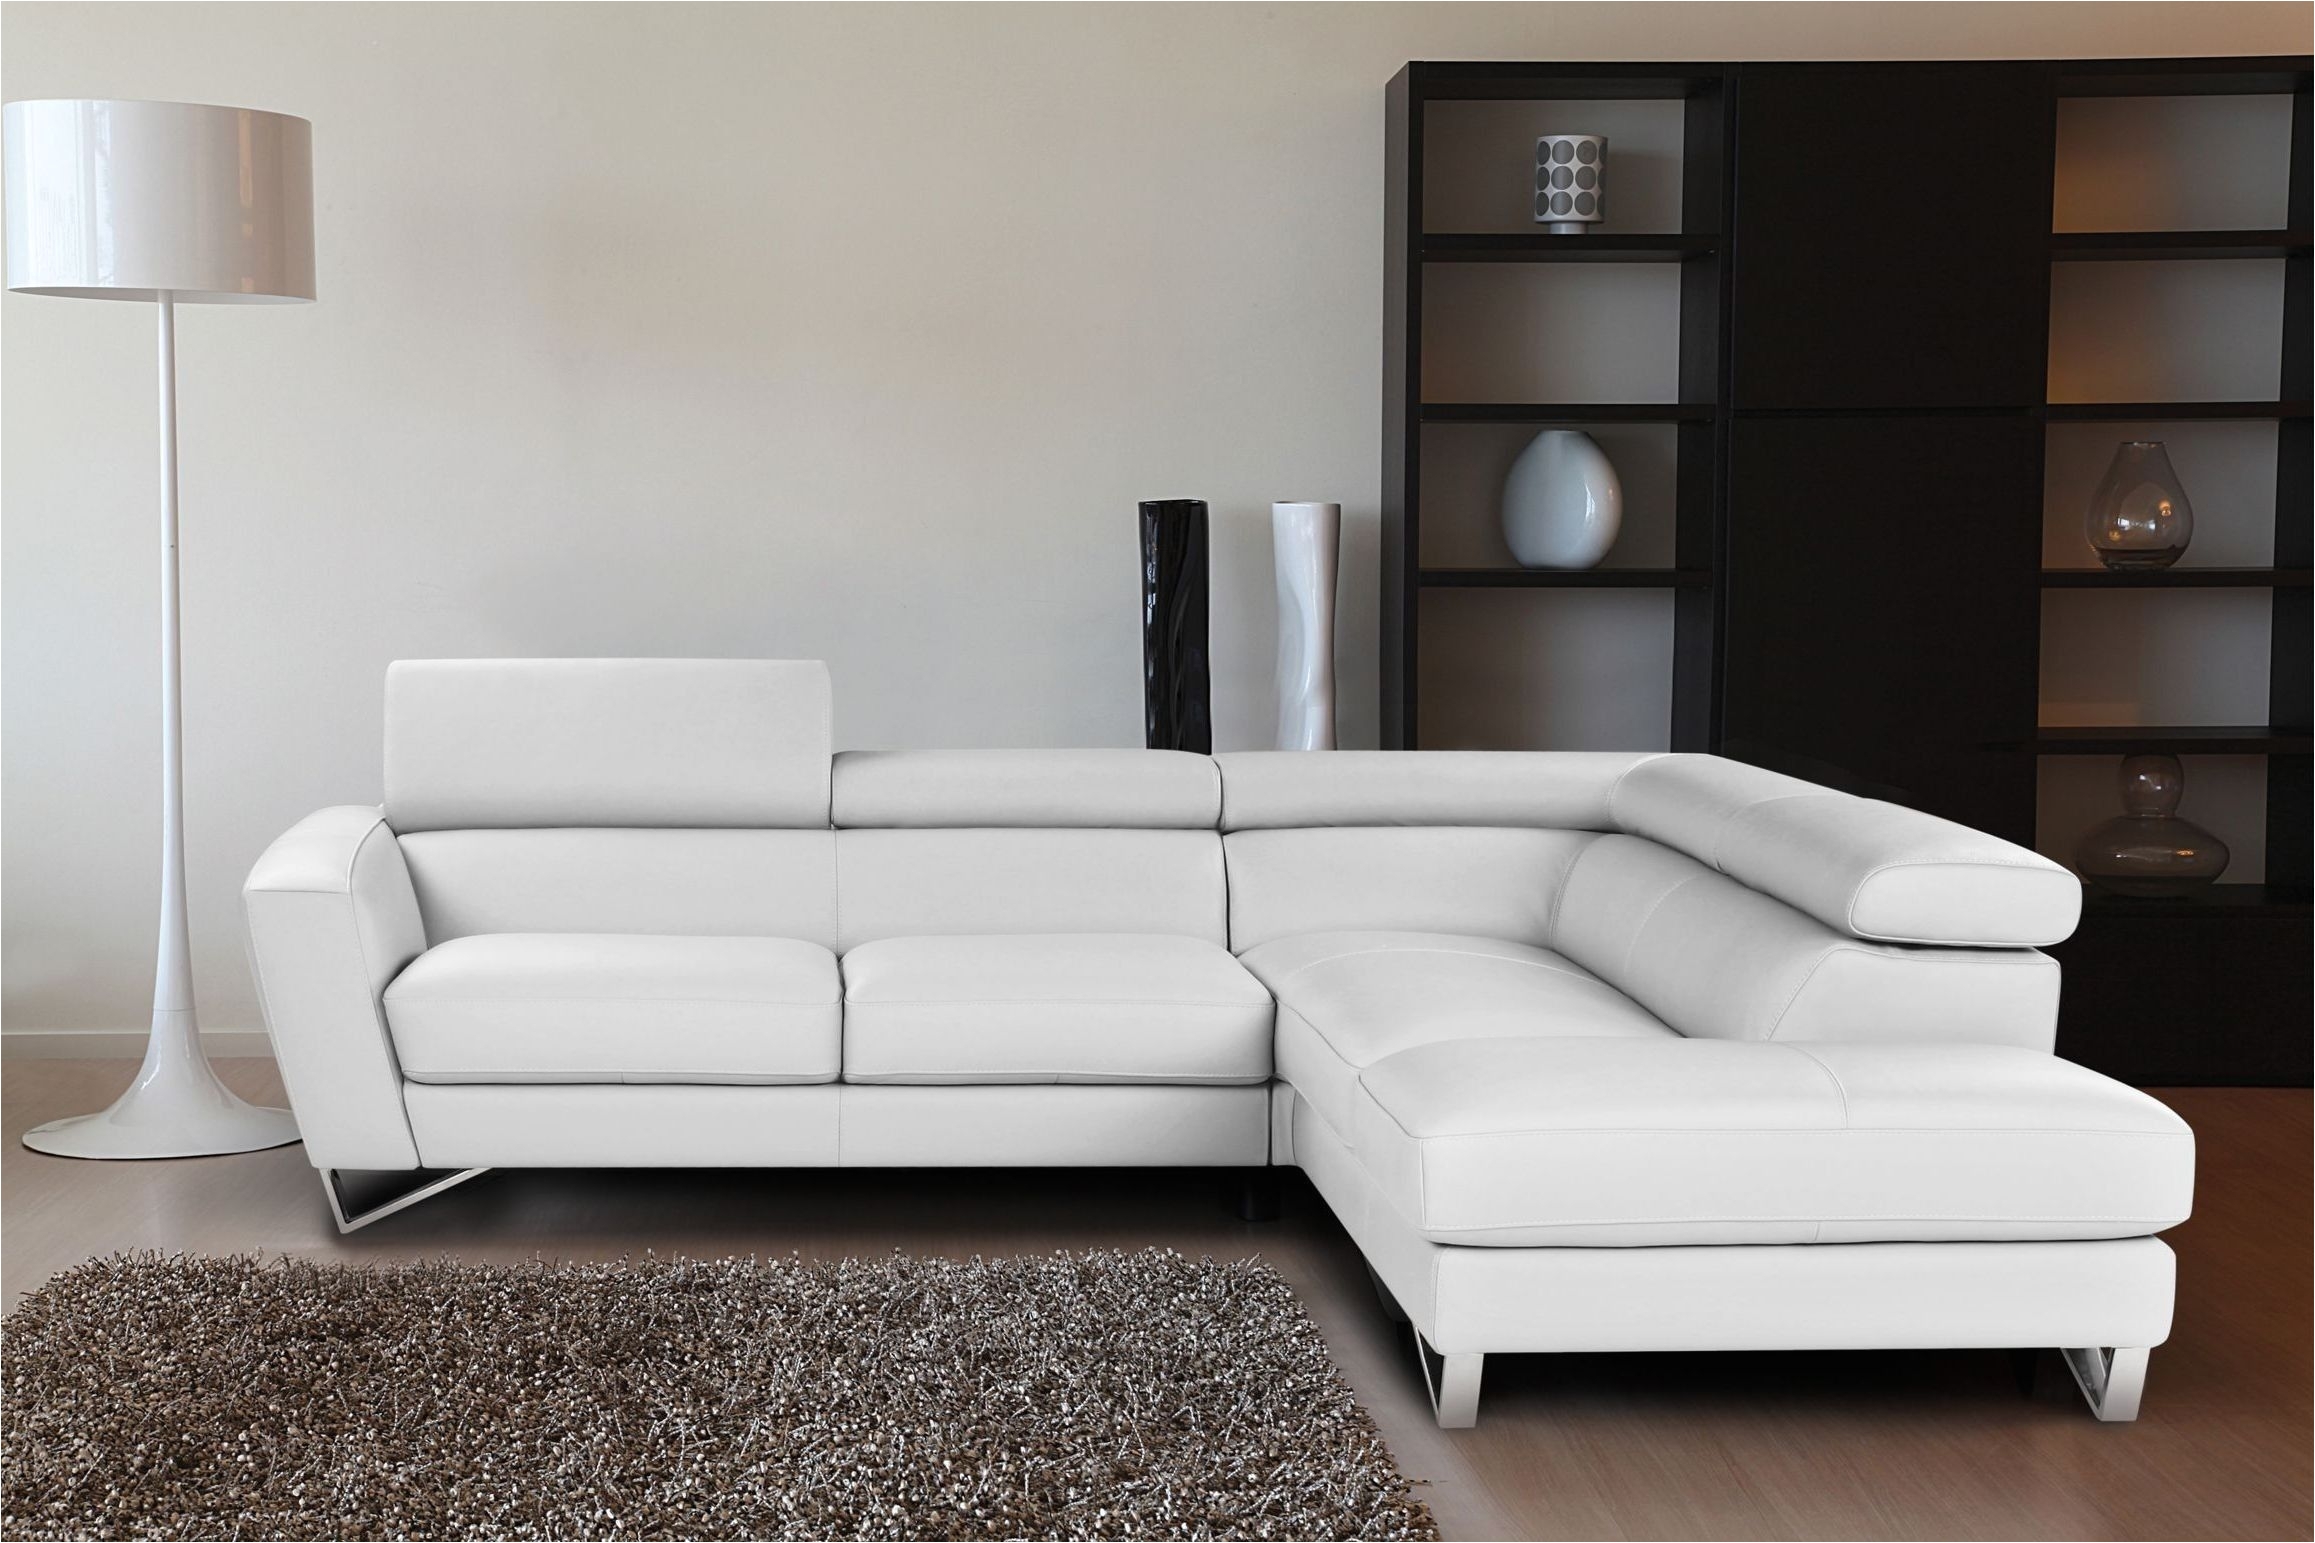 full size of sofa baffling italian sectional sofa pictures inspirations modern marvelous sofas center leather